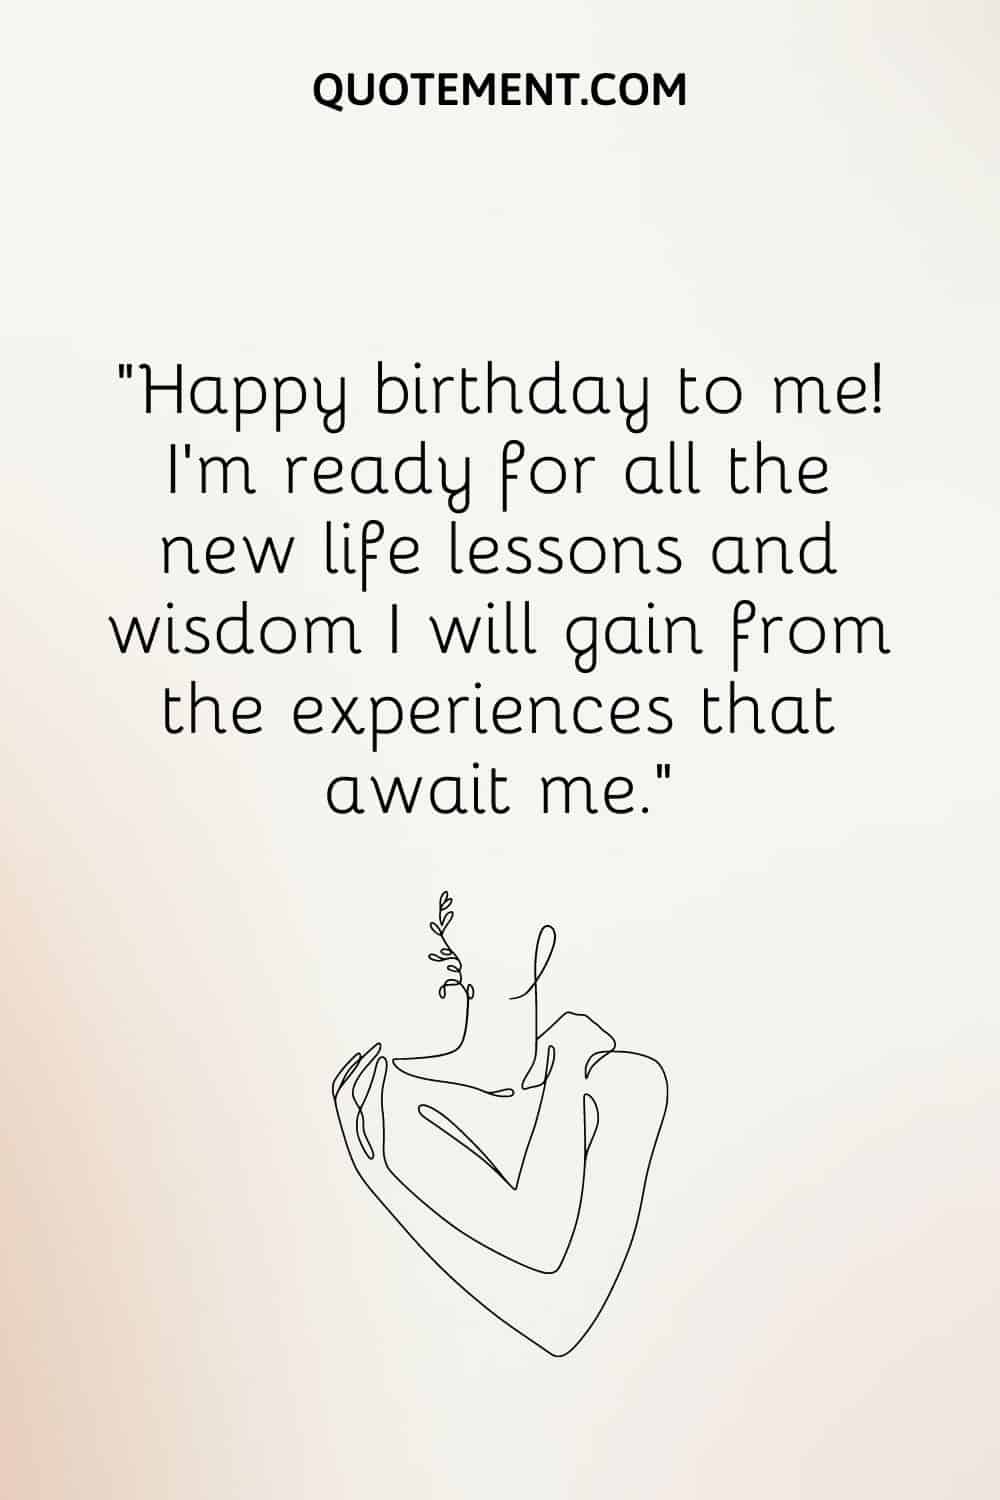 Happy birthday to me! I’m ready for all the new life lessons and wisdom I will gain from the experiences that await me